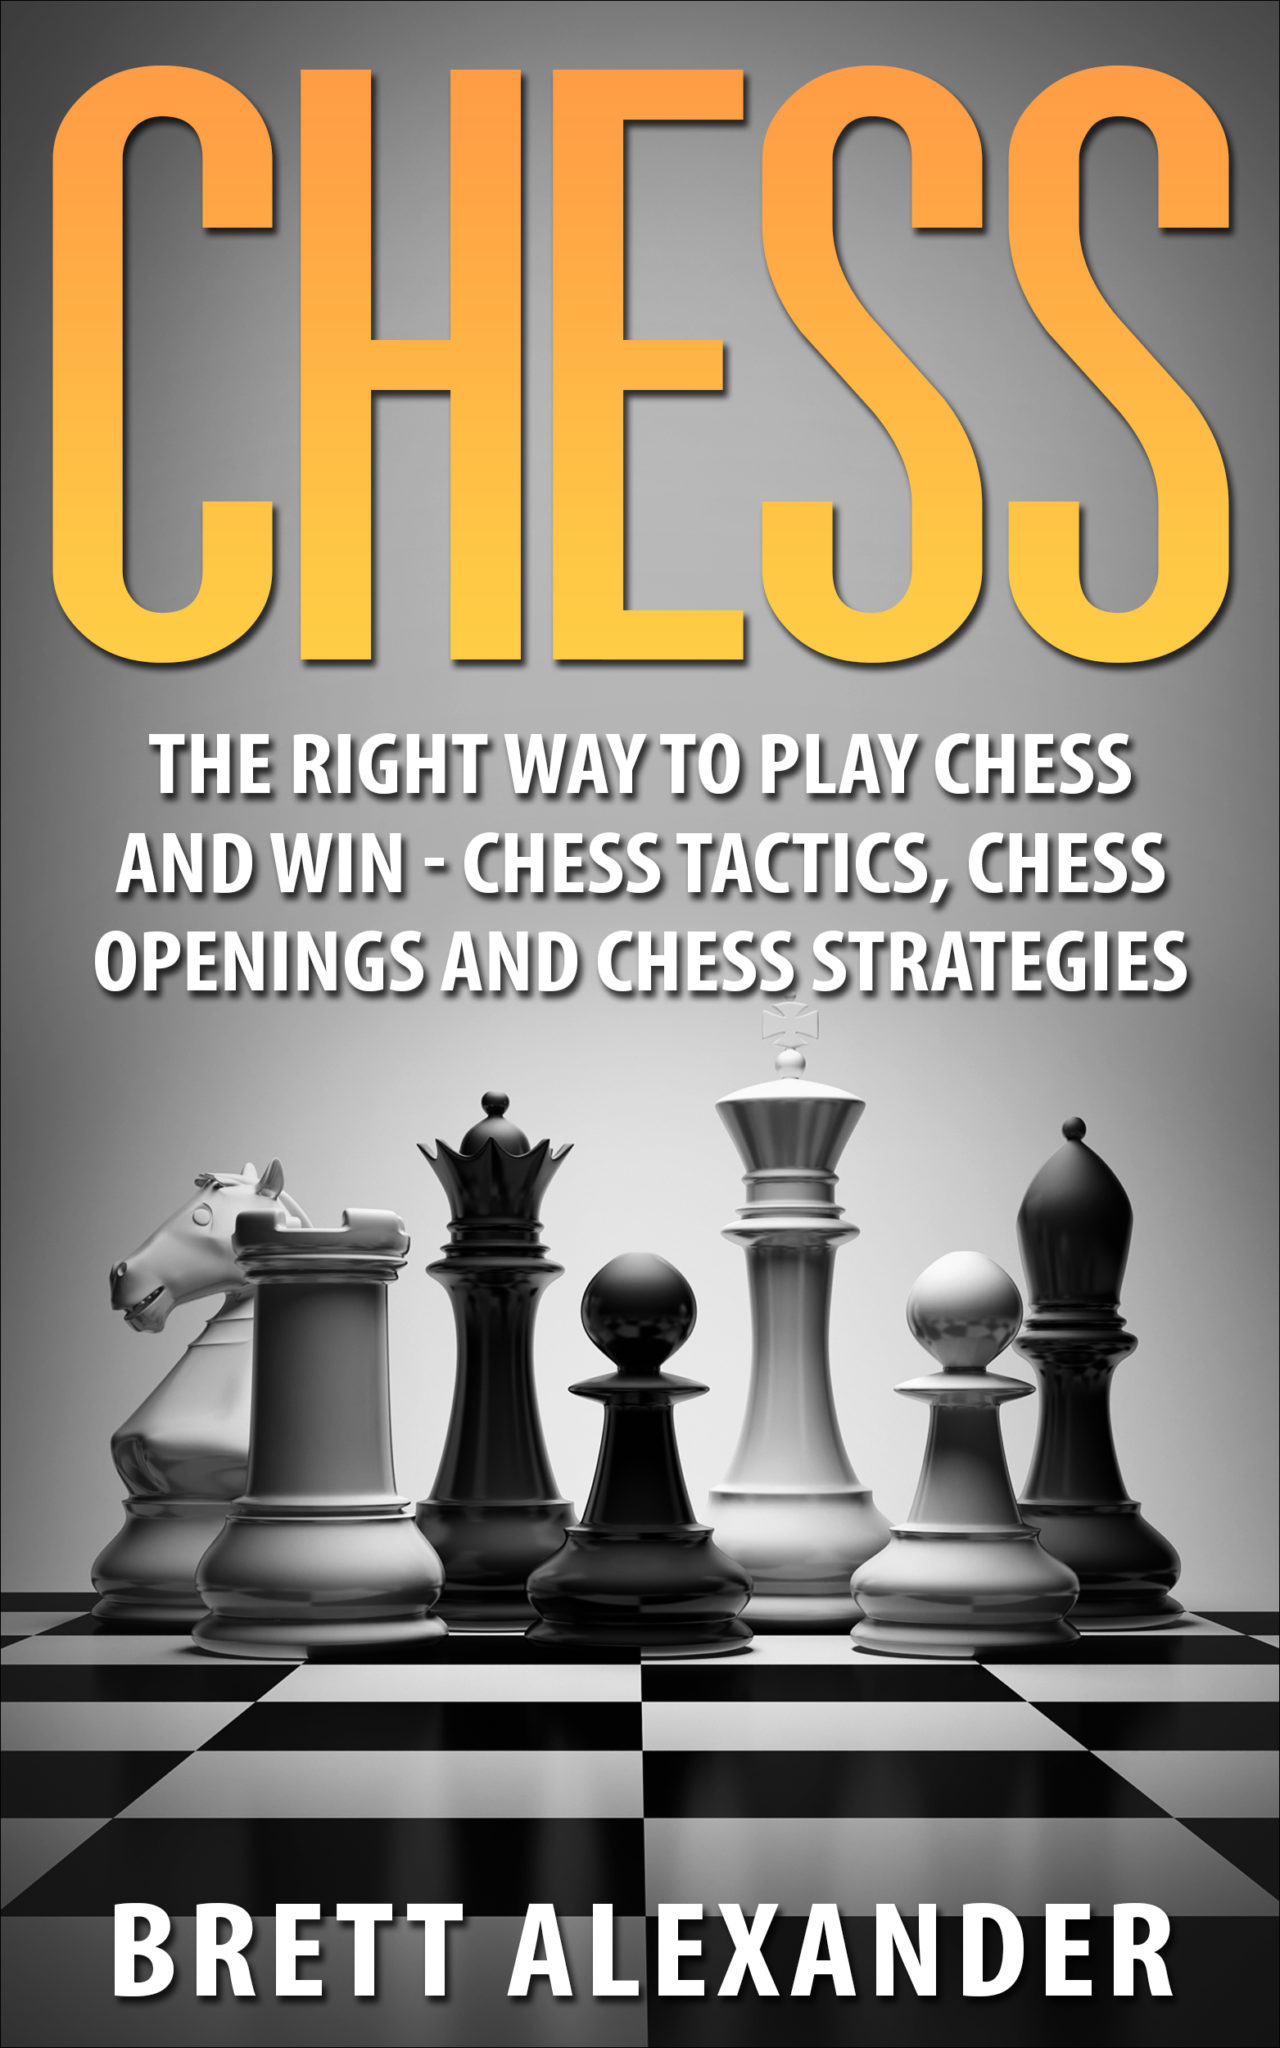 FREE: Chess: The Right Way to Play Chess and Win – Chess Tactics, Chess Openings and Chess Strategies by Brett Alexander